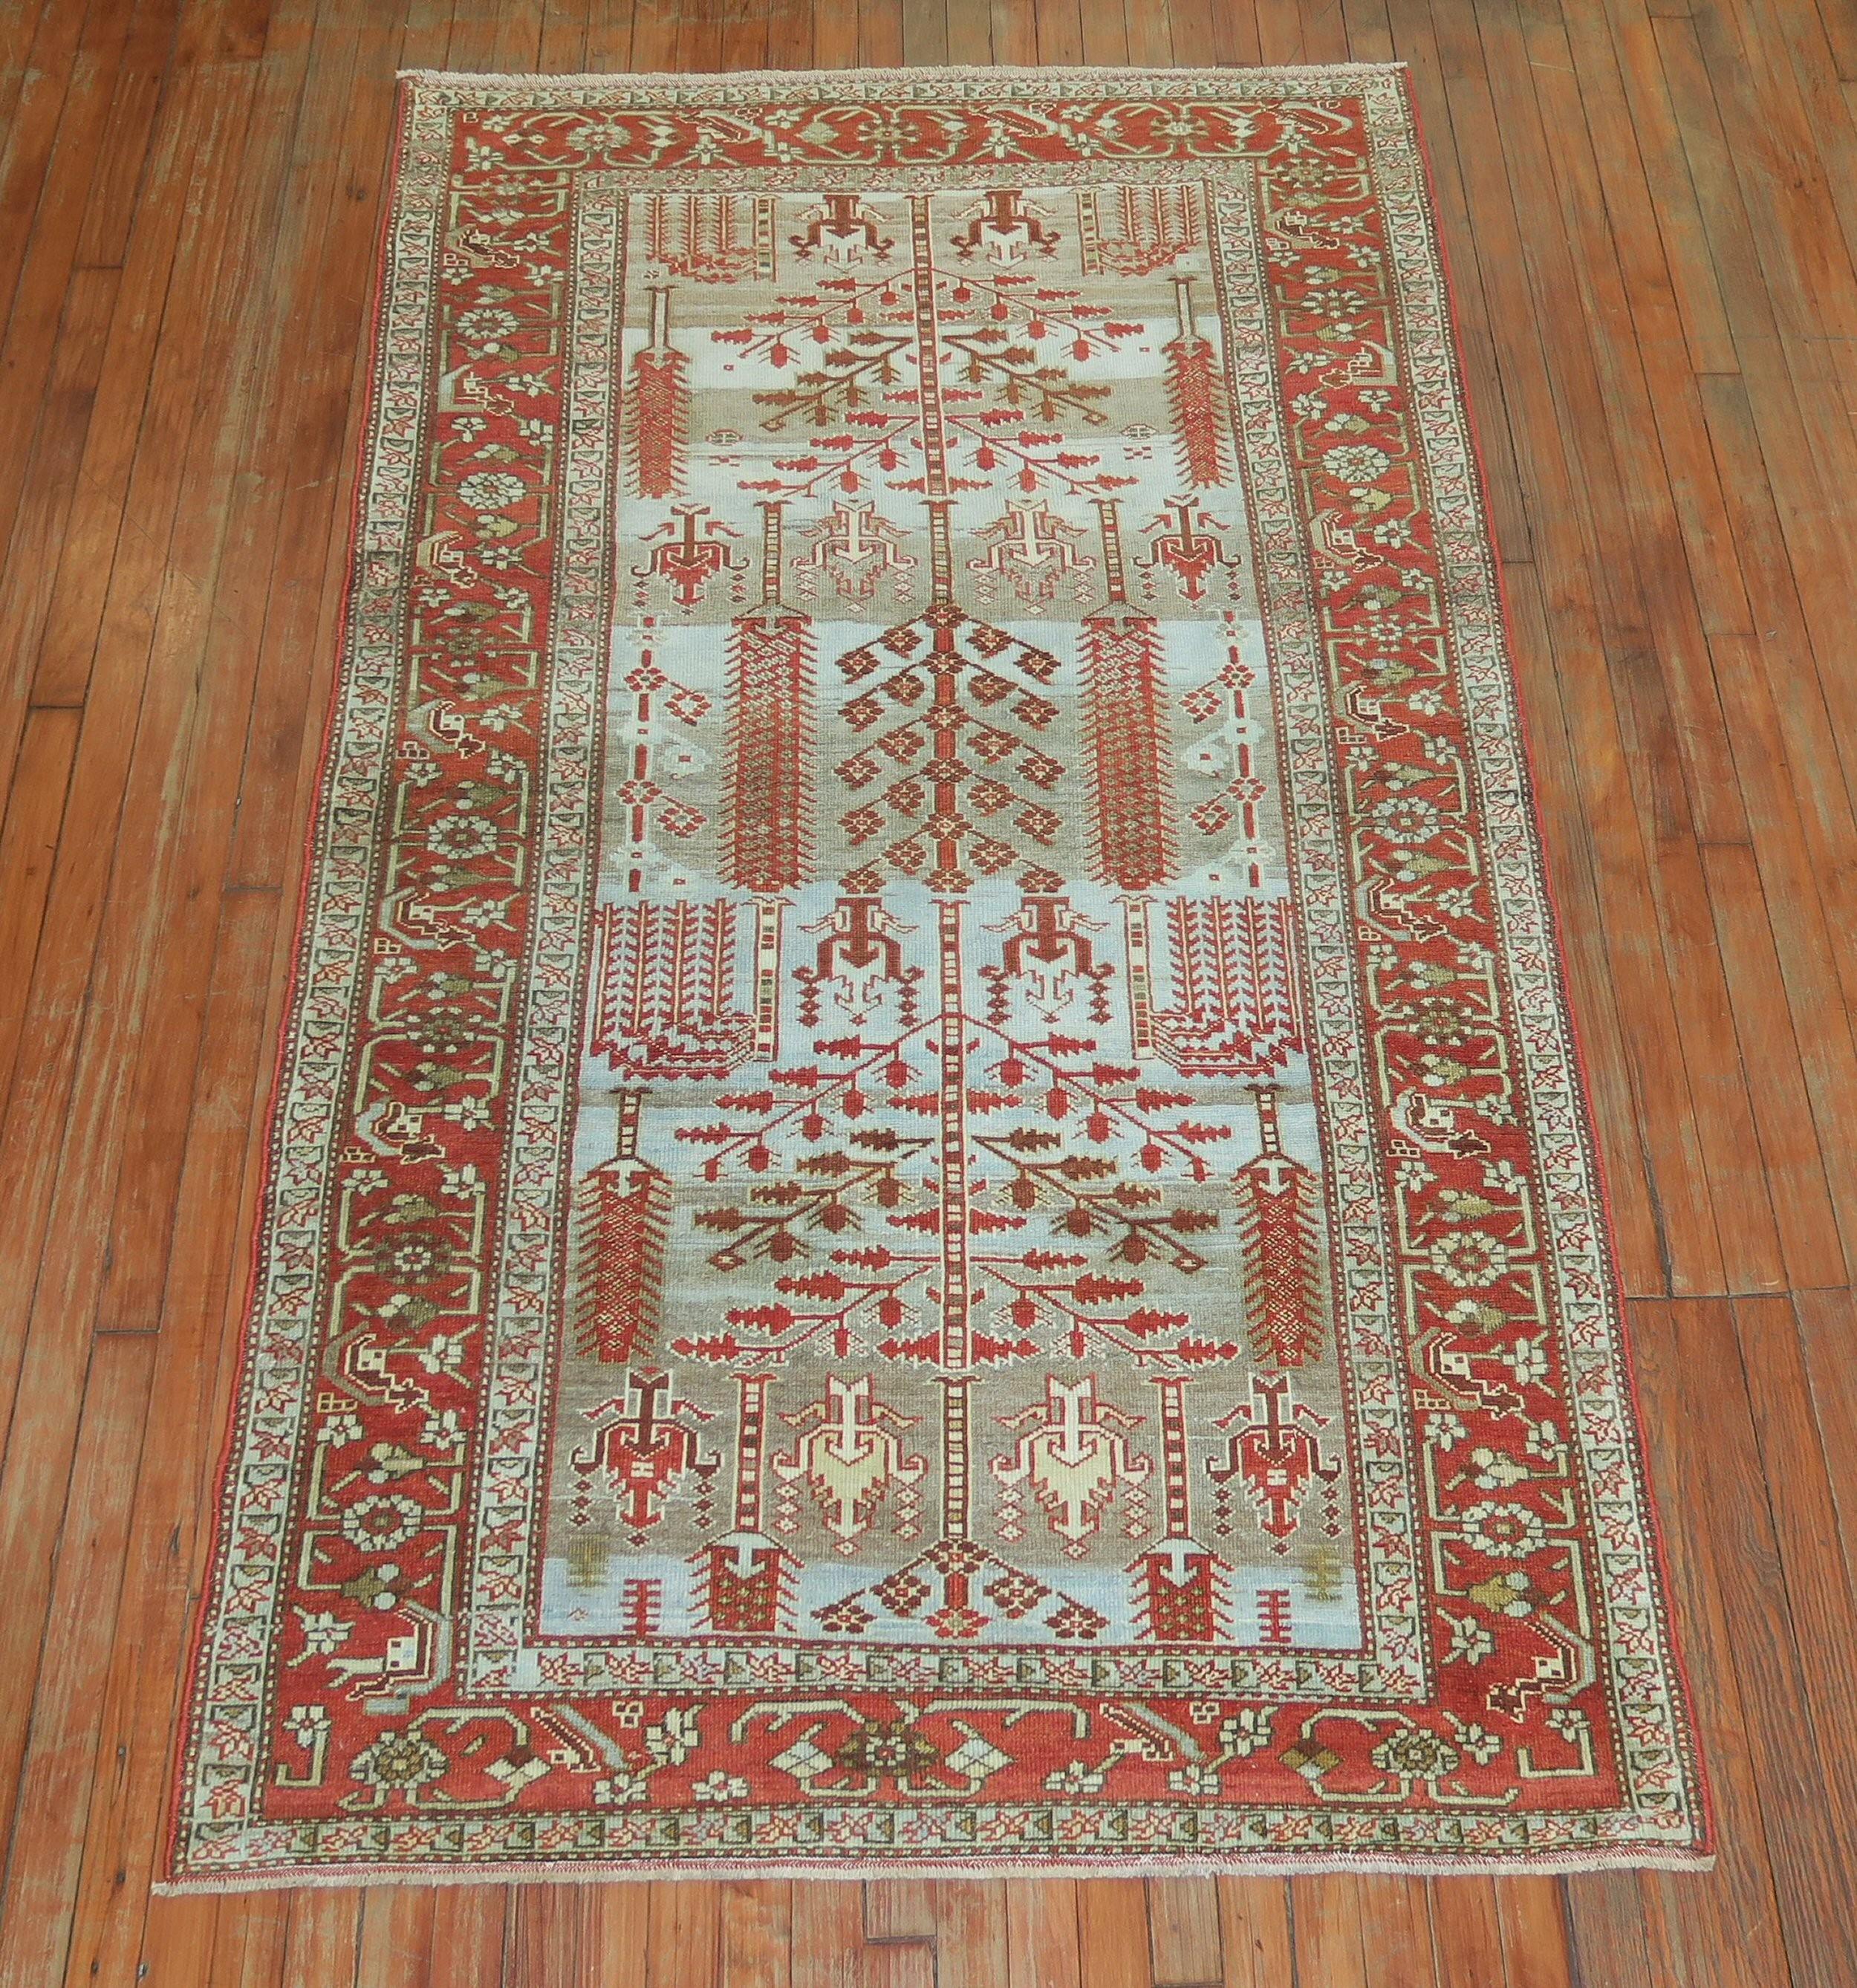 Early 20th century Persian Malayer rug featuring a weeping willow tree of life motif on a powder blue ground with striations of brown mixed in. The border is in the rust color family. Great condition overall.

circa 1920, measures: 4'2